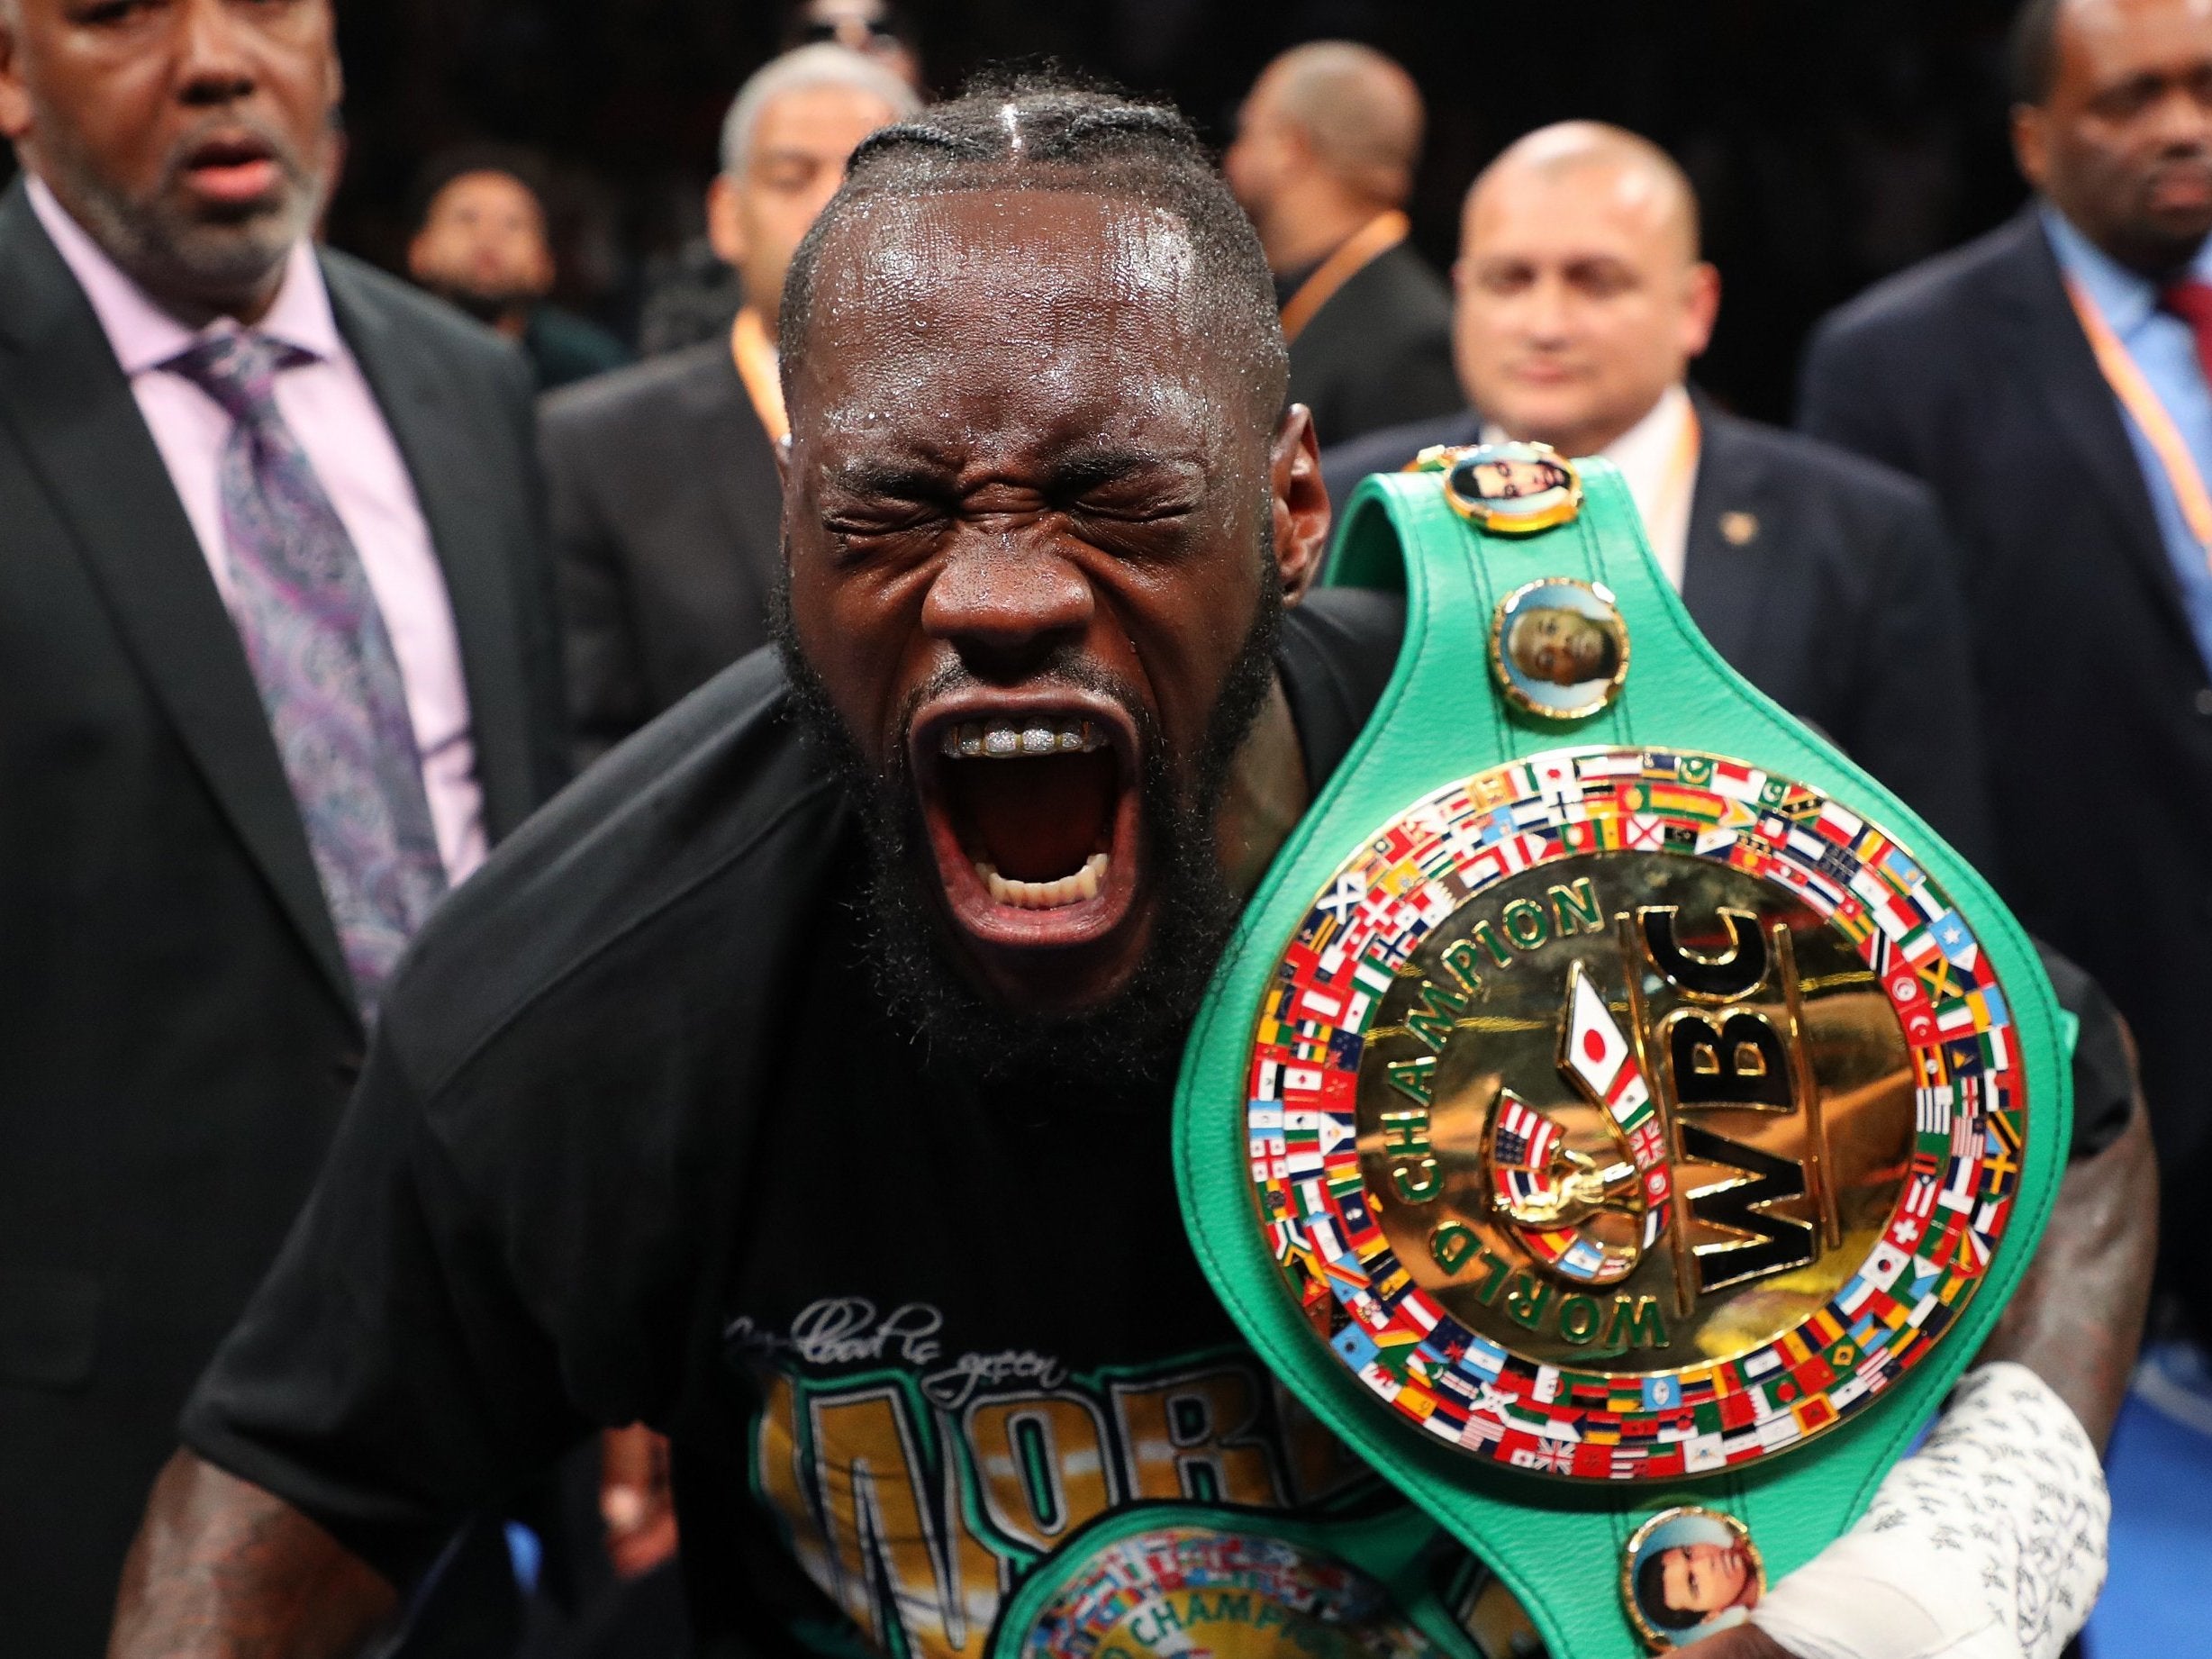 Wilder was expected to fight Whyte in 2020